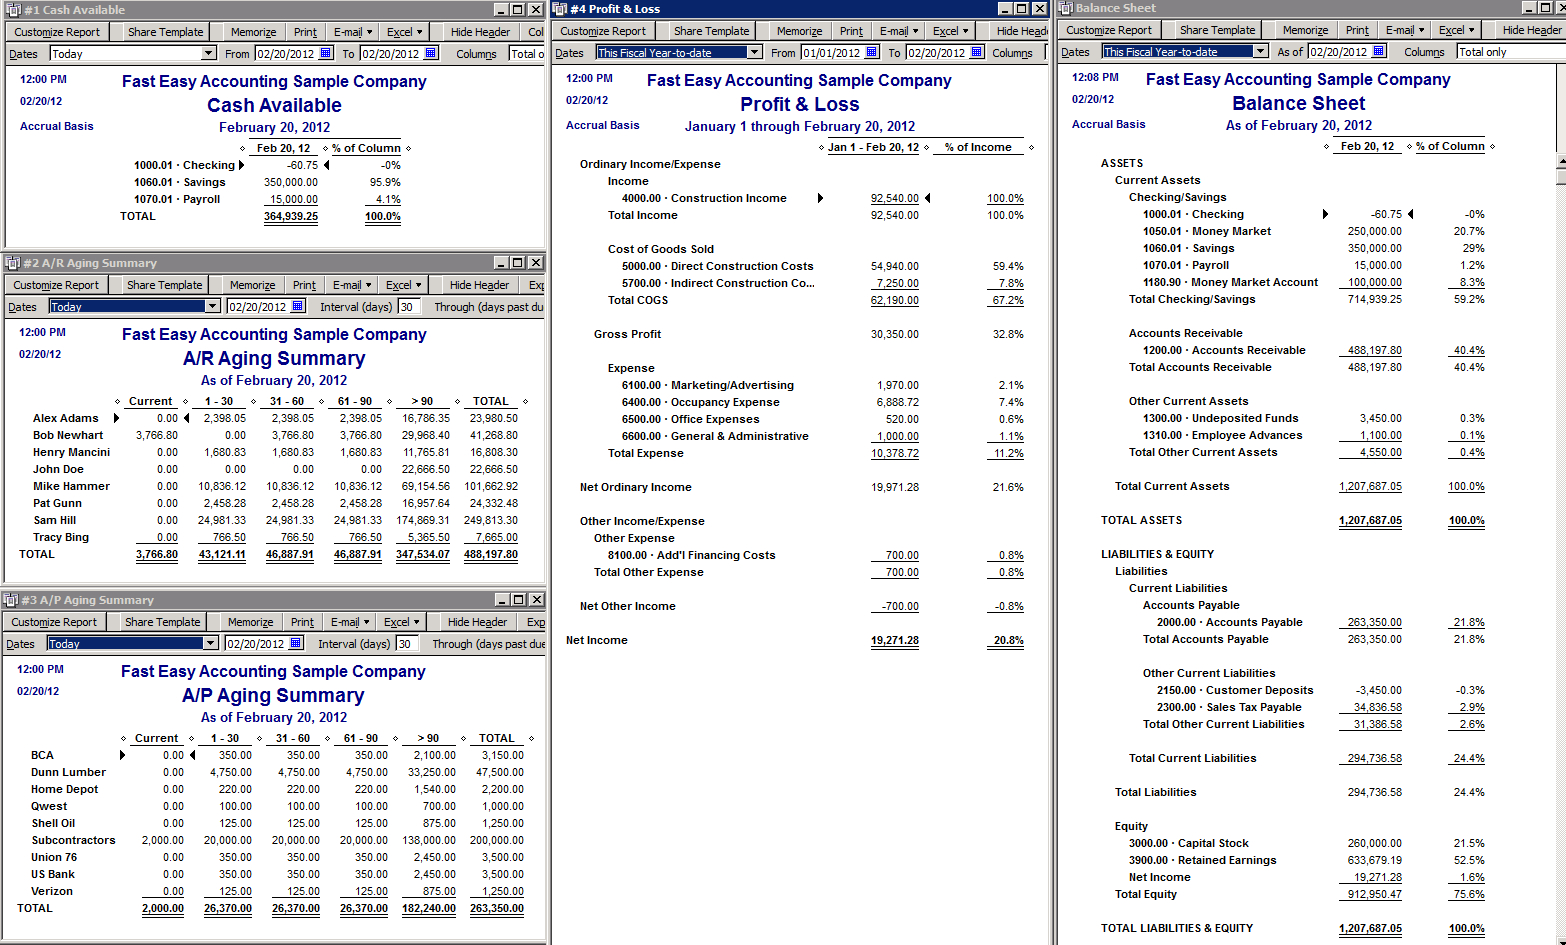 Quickbooks Balance Sheet Report For Quick Book Reports Templates